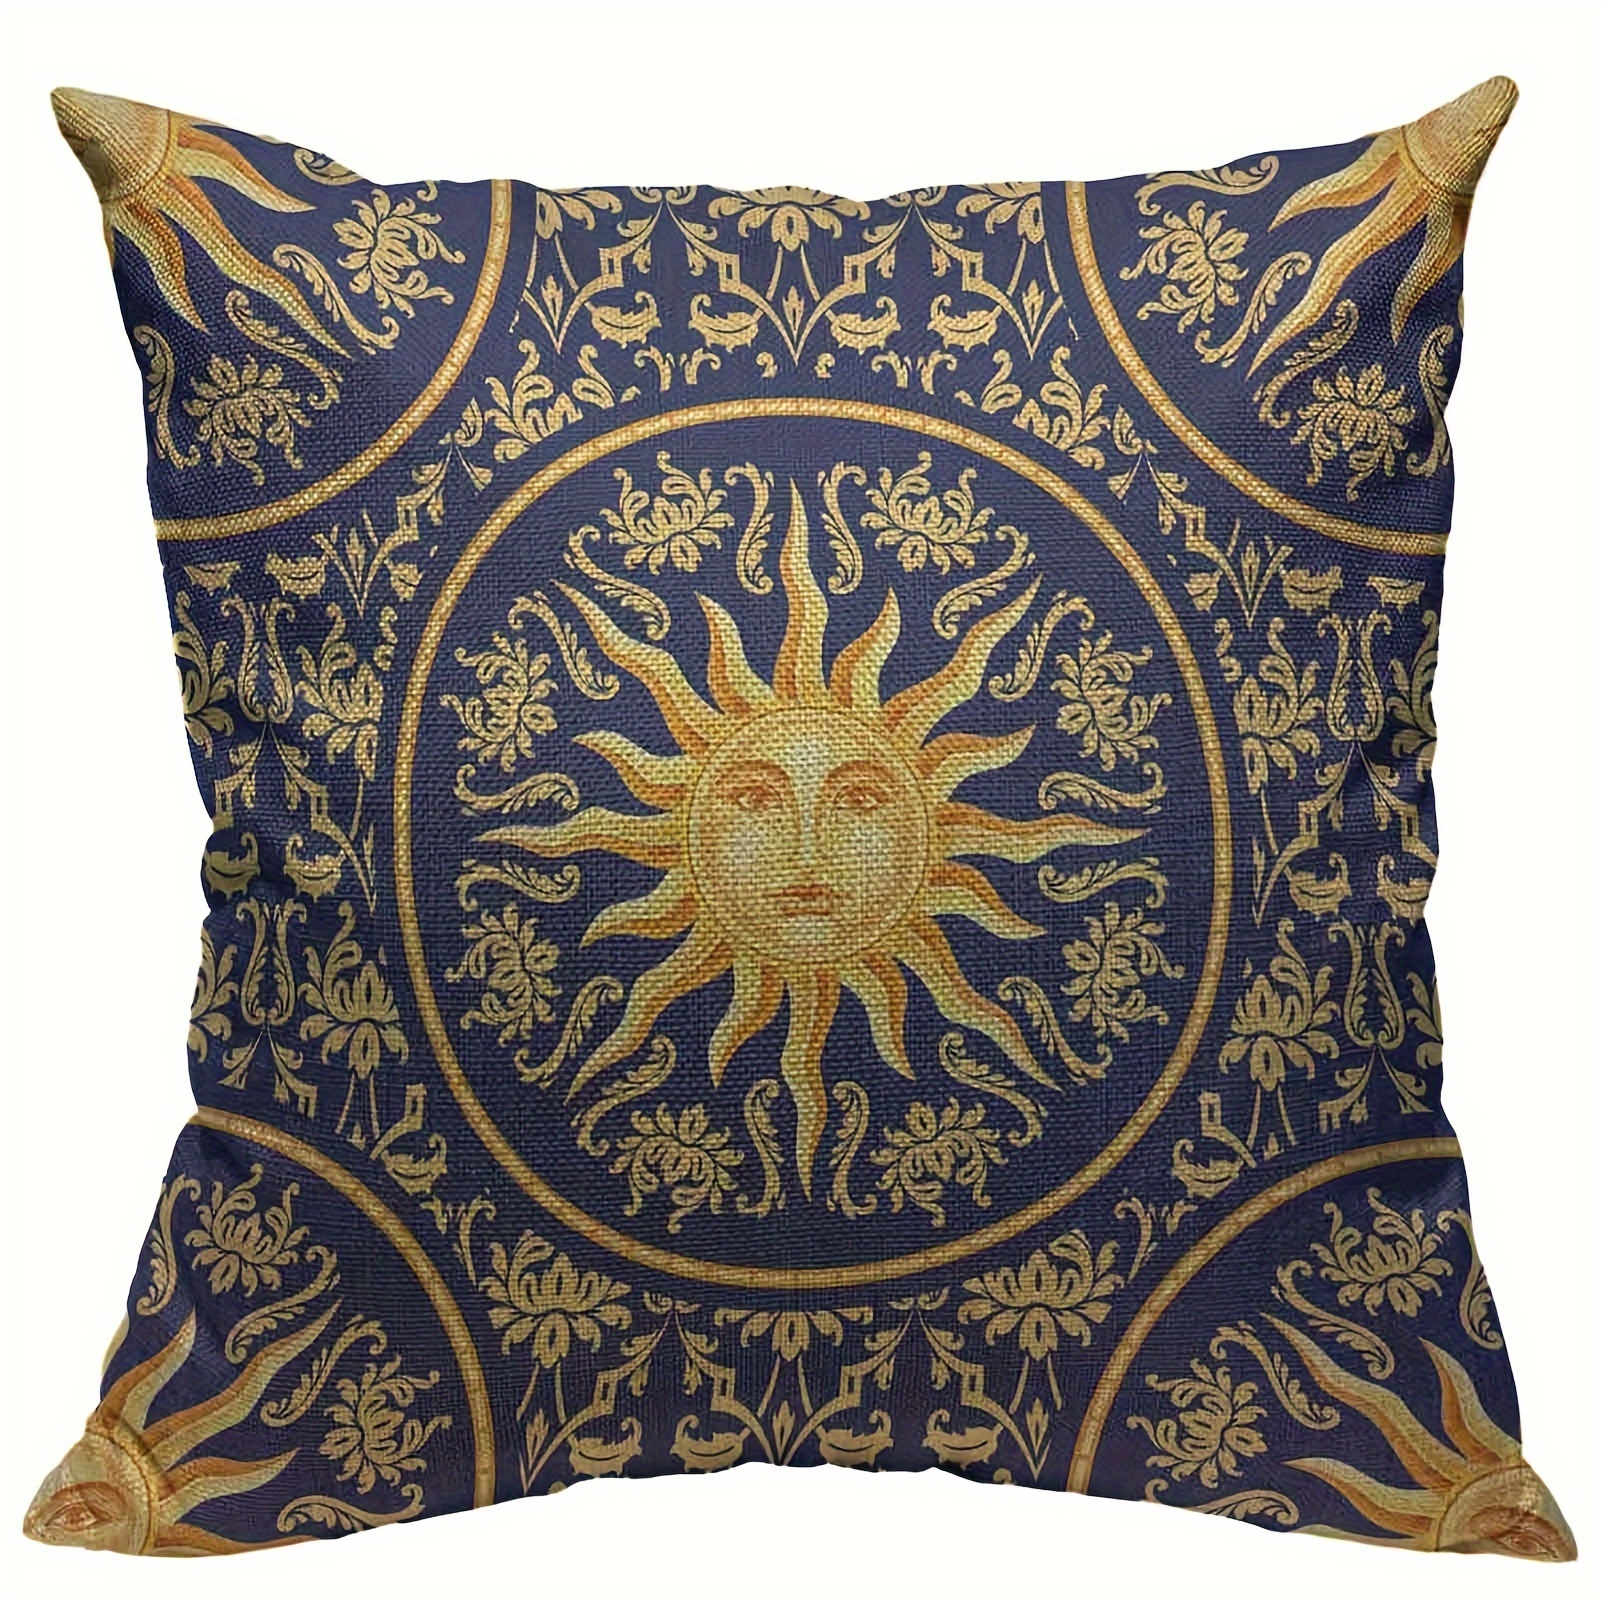 

1pc Throw Pillow Covers Vintage Celestial Baroque Sun Face Planet Astronomy Decorative Square Pillowcases Cushion Short Plush Decor 18x18 Inch (pillow Insert Not Included)